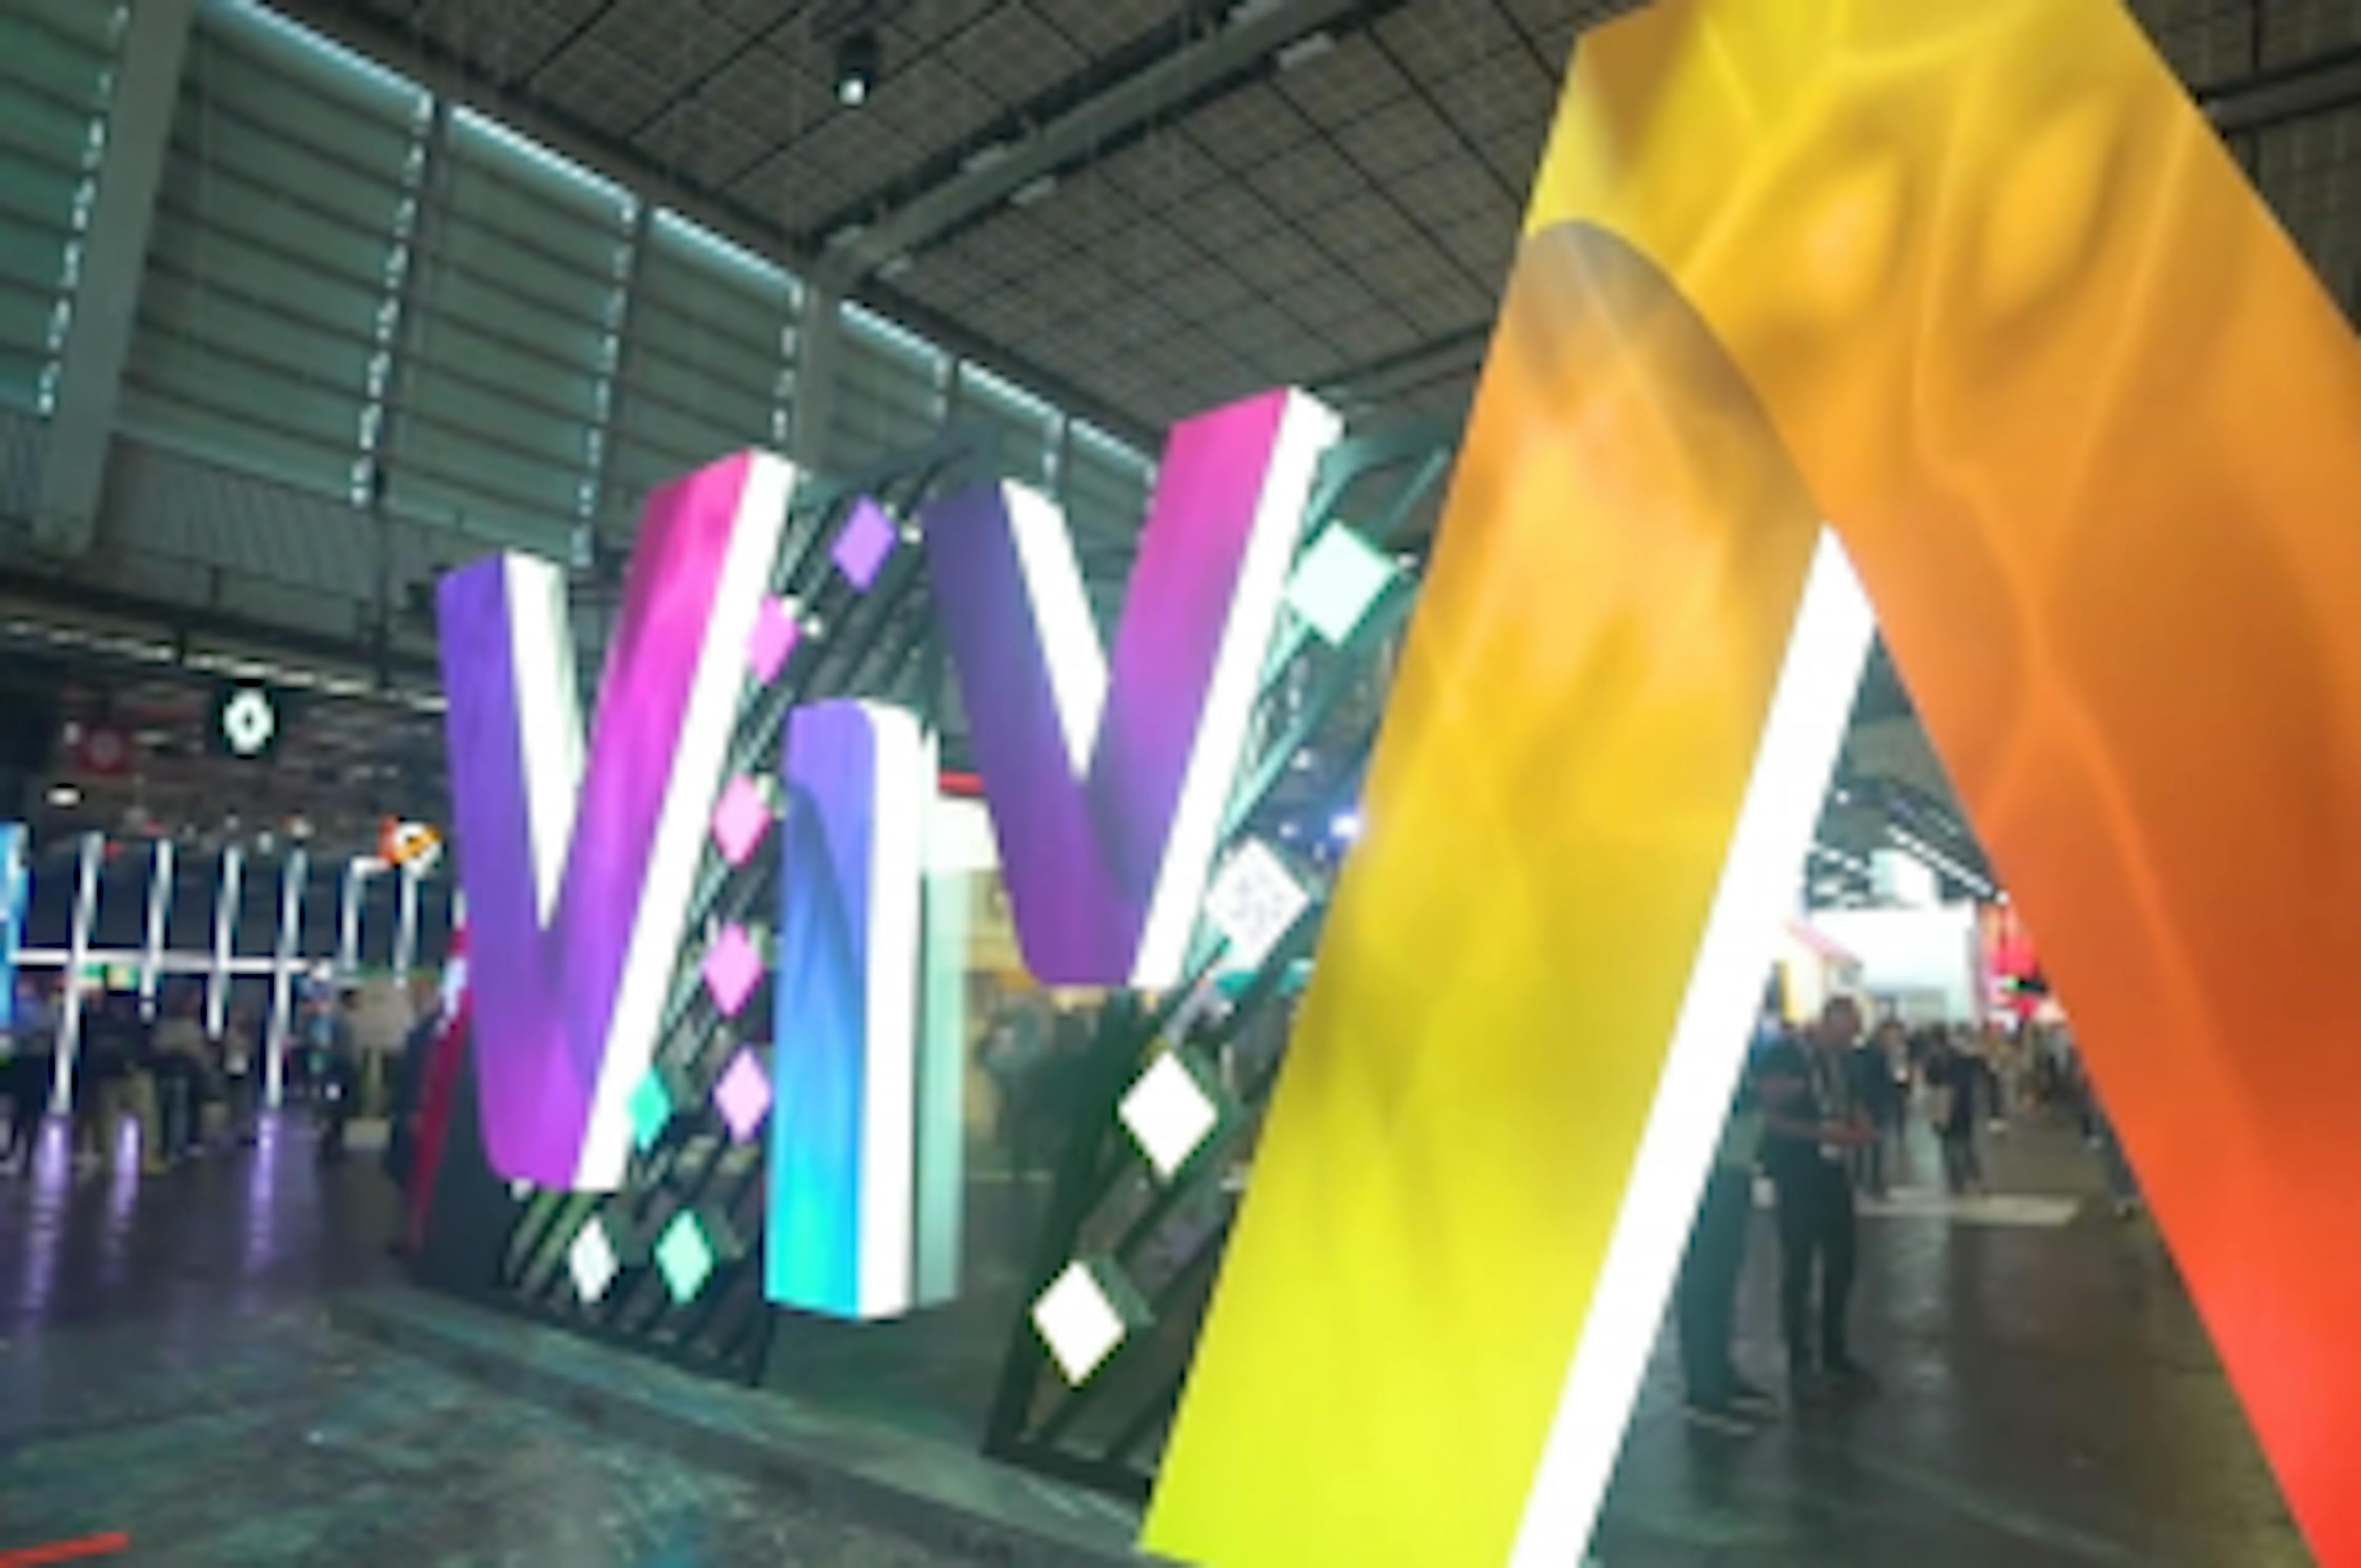 Cover Founding partner of Viva Technology, LVMH unveils its ambition for the largest event dedicated to innovation and startups in Europe